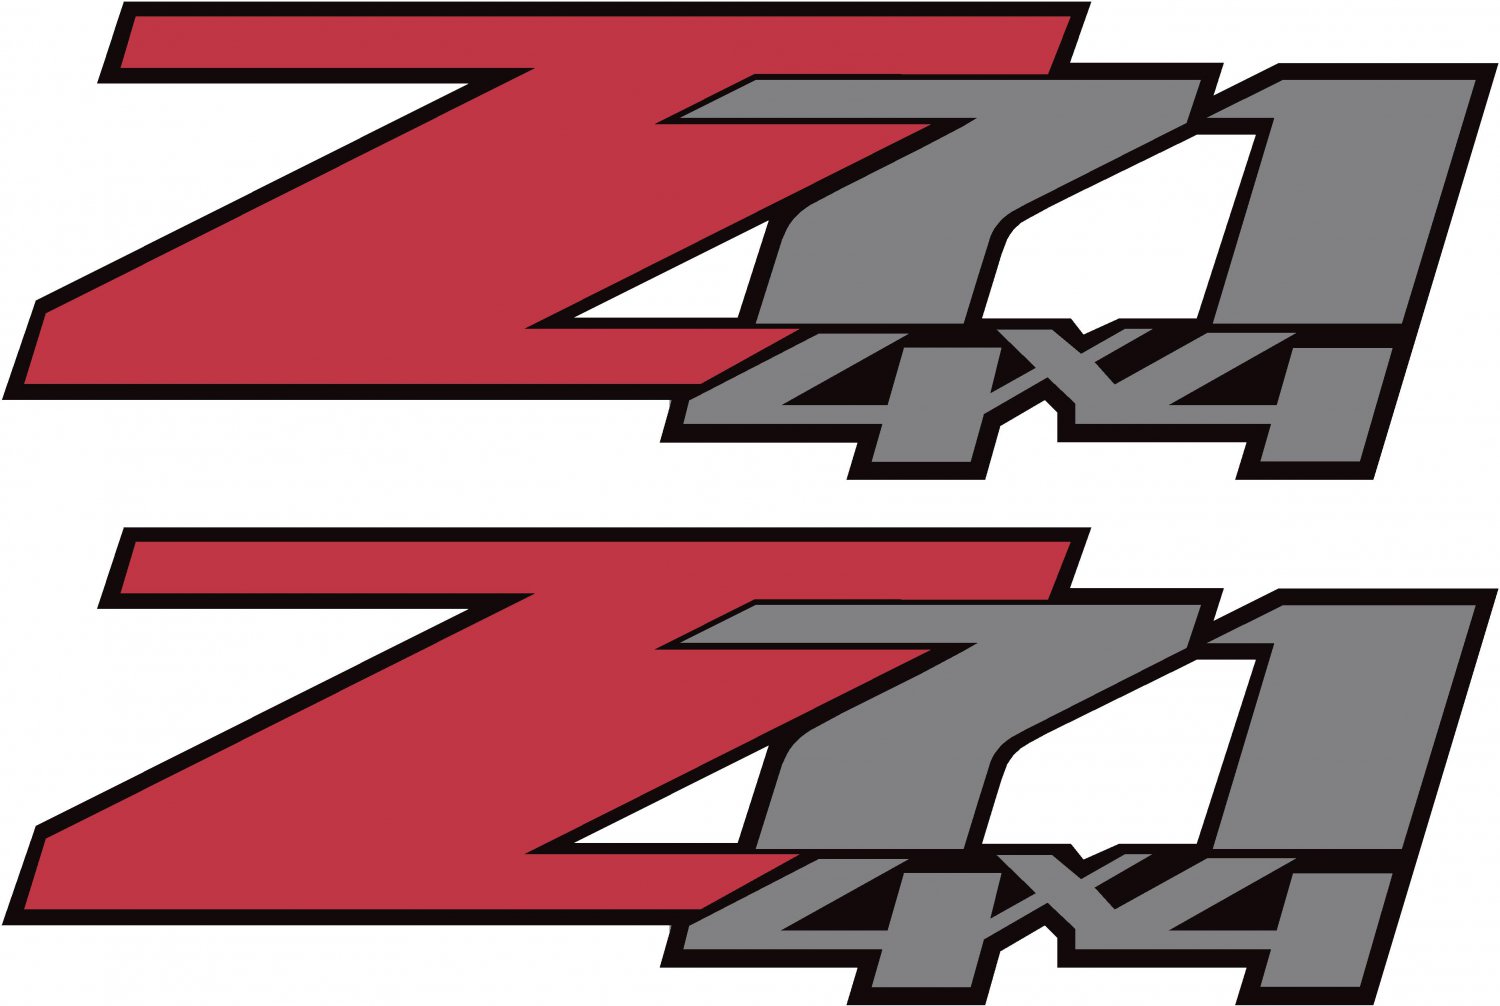 Chevy Z71 4x4 Oem Factory replacement Truck Decal/Sticker X2! helpful non h...